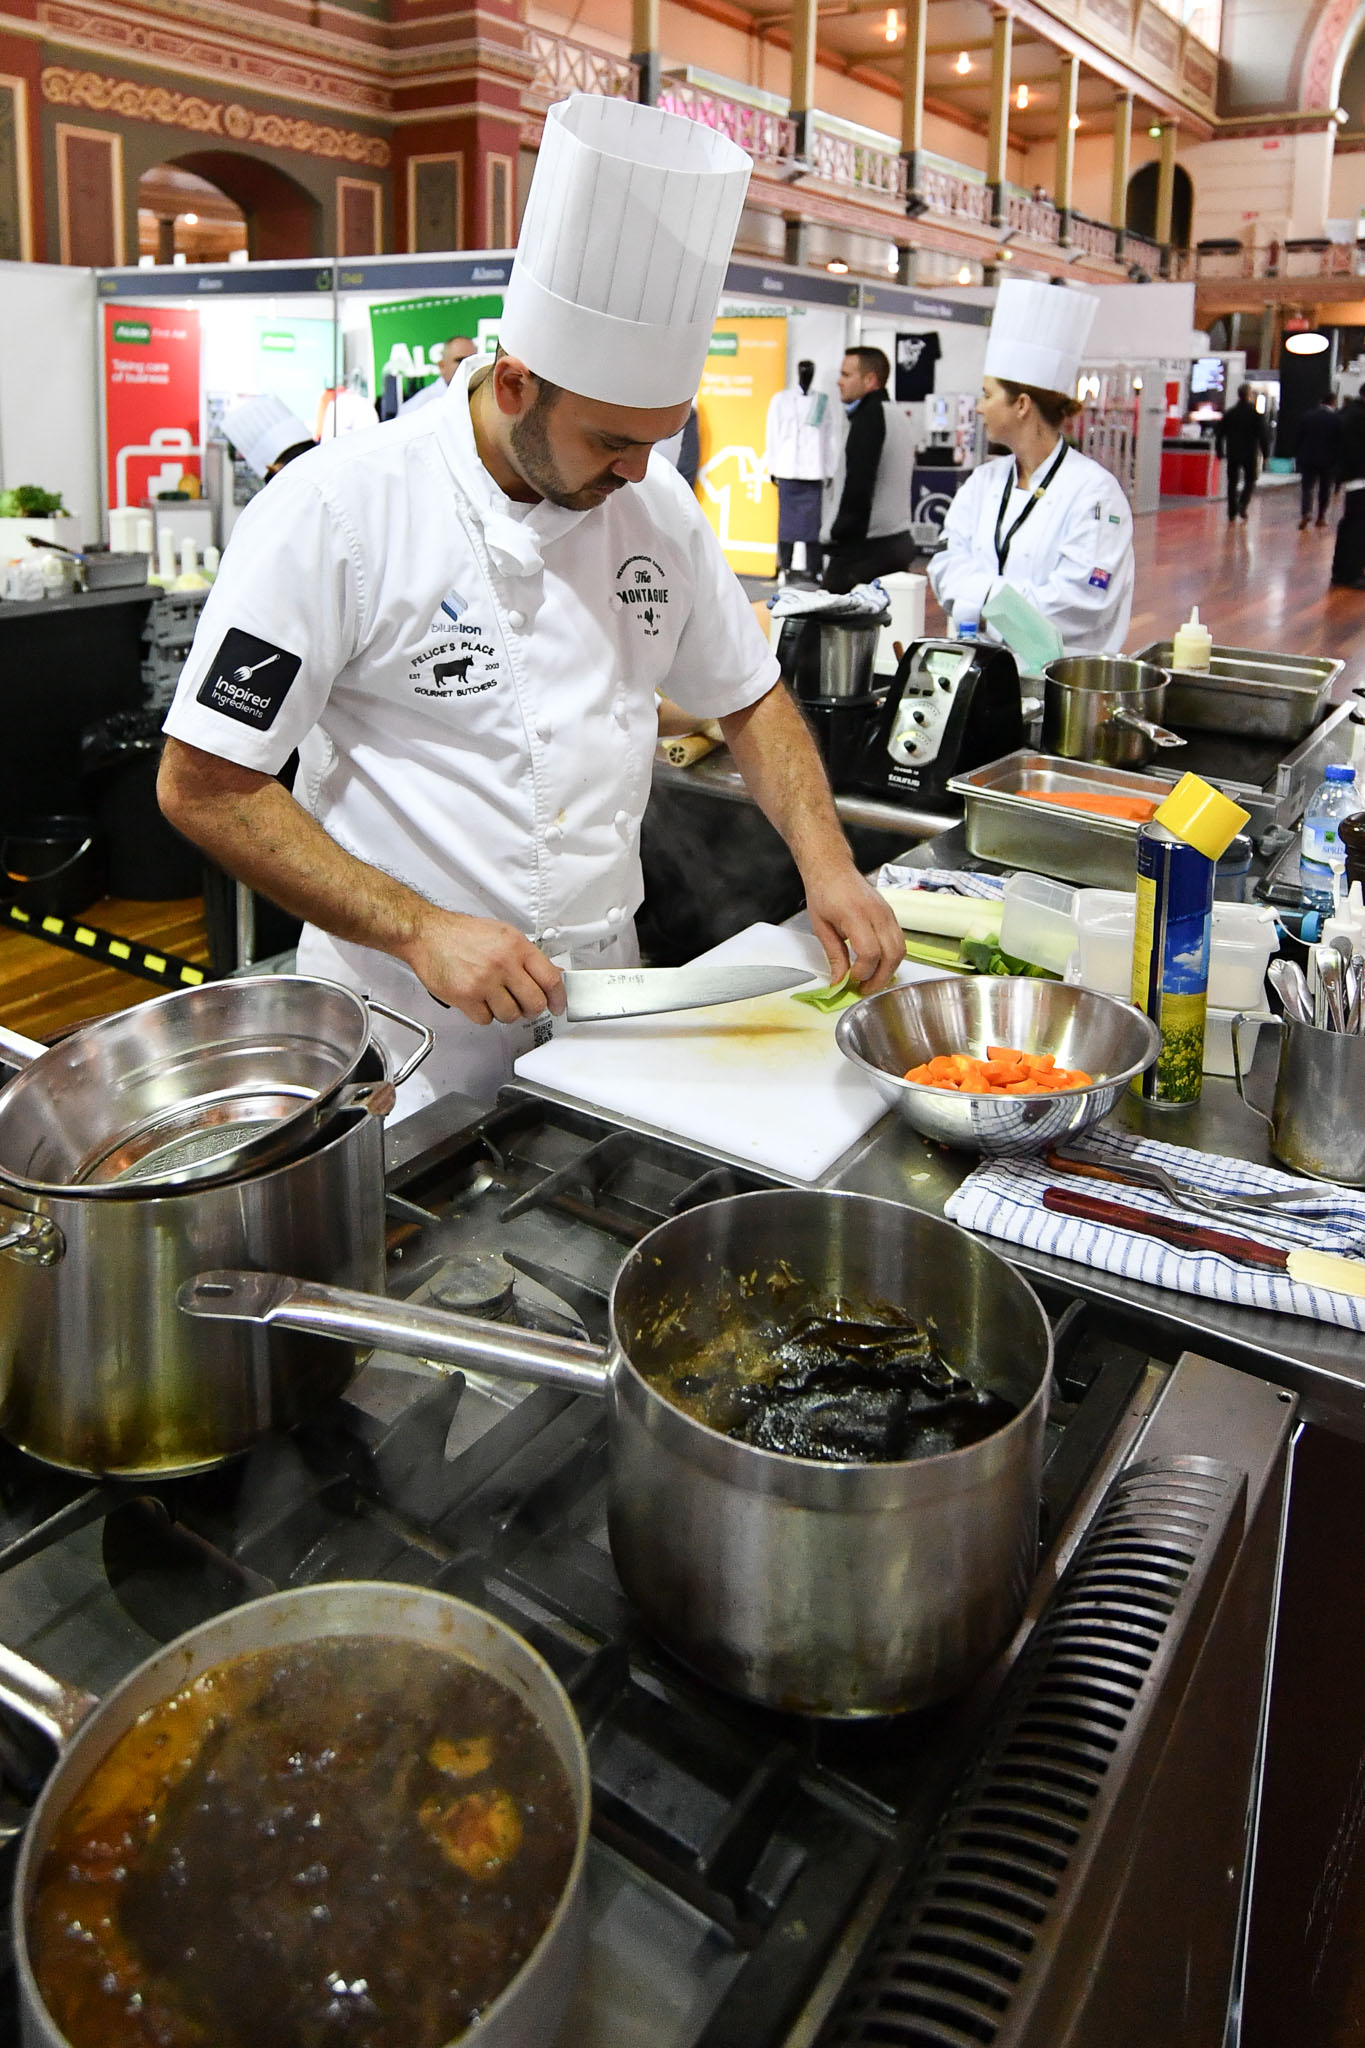 Melbourne, 30 May 2017 - Daniel Soto of the Montague Hotel in South Melbourne prepares vegetables at the Australian selection trials of the Bocuse d'Or culinary competition held during the Food Service Australia show at the Royal Exhibition Building in Melbourne, Australia. Photo Sydney Low